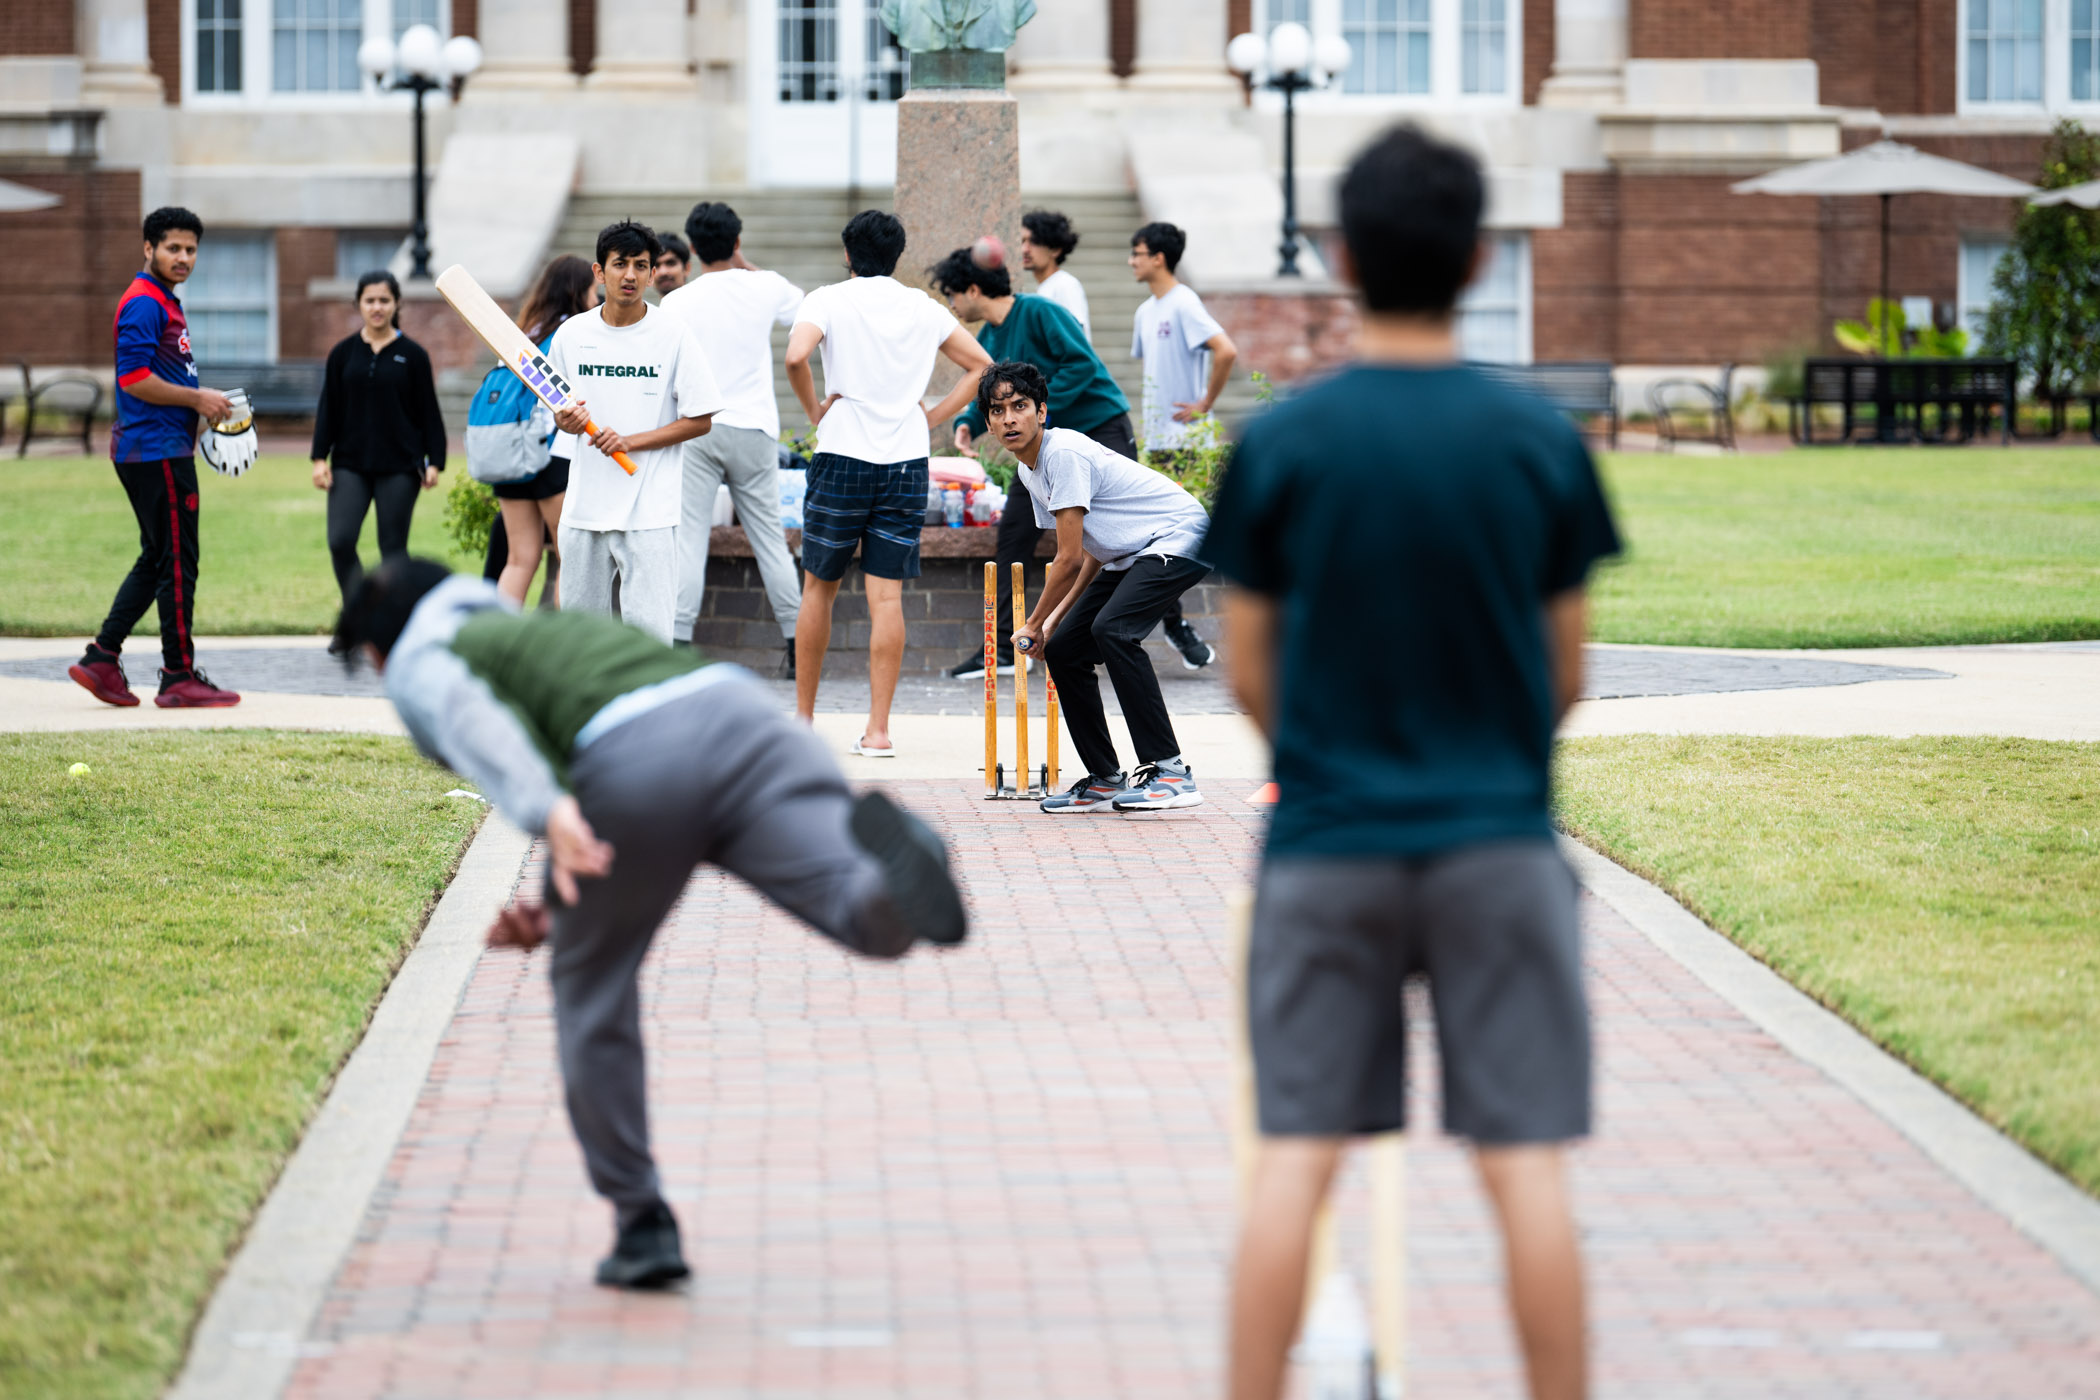 As part of the organization&#039;s &quot;Sports Week,&quot; members of Mississippi State&#039;s Nepalese Student Association (NSA) compete in a friendly game of cricket on the Drill Field.